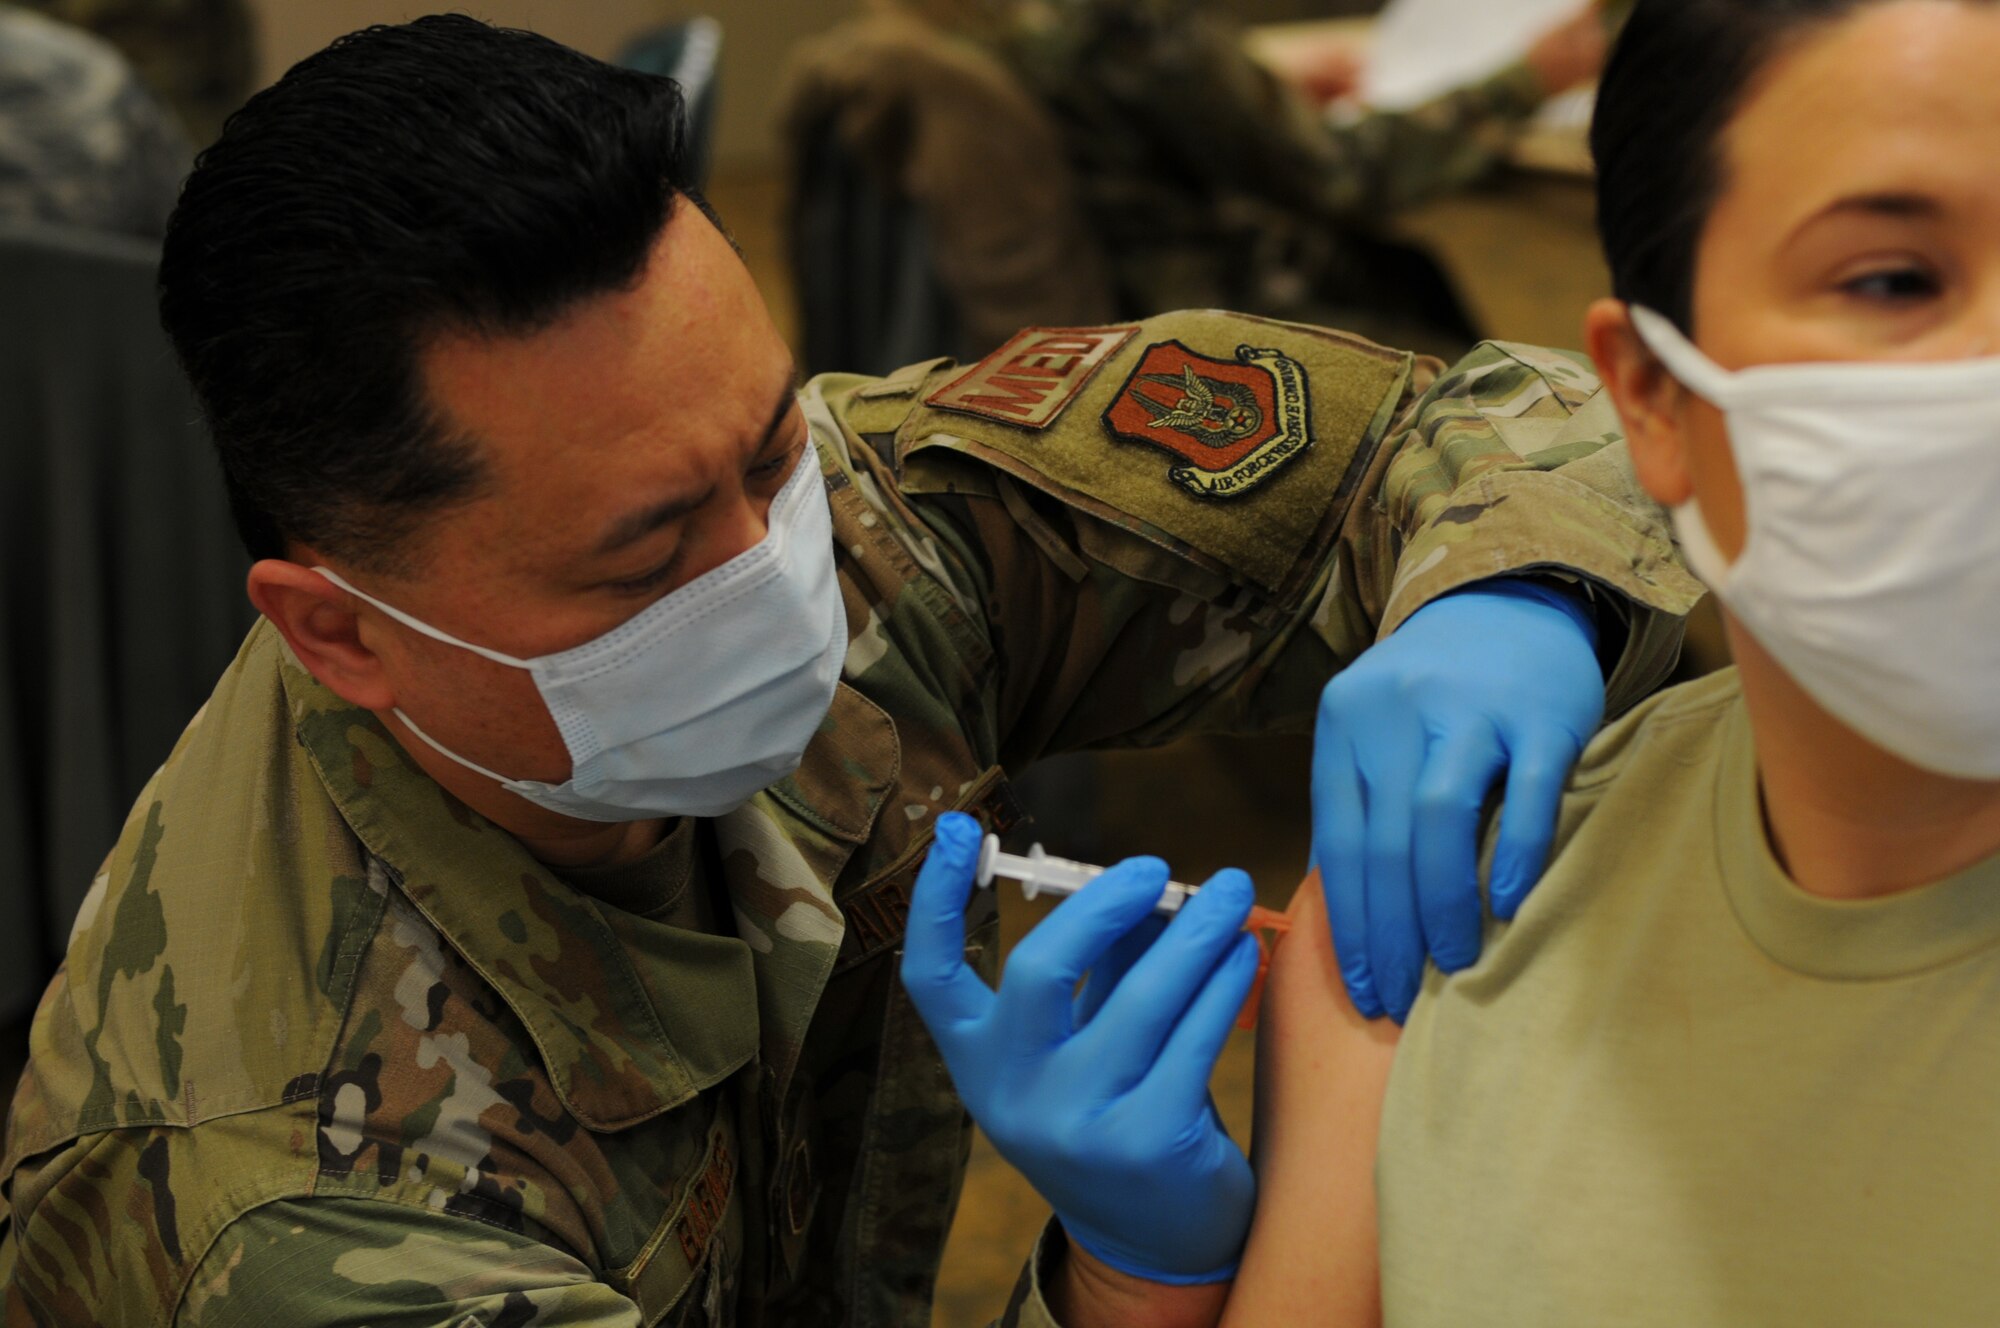 U.S. Air Force Reservist Master Sgt. John Barnes, a medical technician with the 446th Aeromedical Staging Squadron, administers the first dose of the Moderna COVID-19 vaccine to U.S. Air Force Reservist Tech. Sgt. Alexis Righero, an equal opportunity advisor with the 446th Airlift Wing, at Joint Base Lewis-McChord, Washington, Feb. 6, 2021